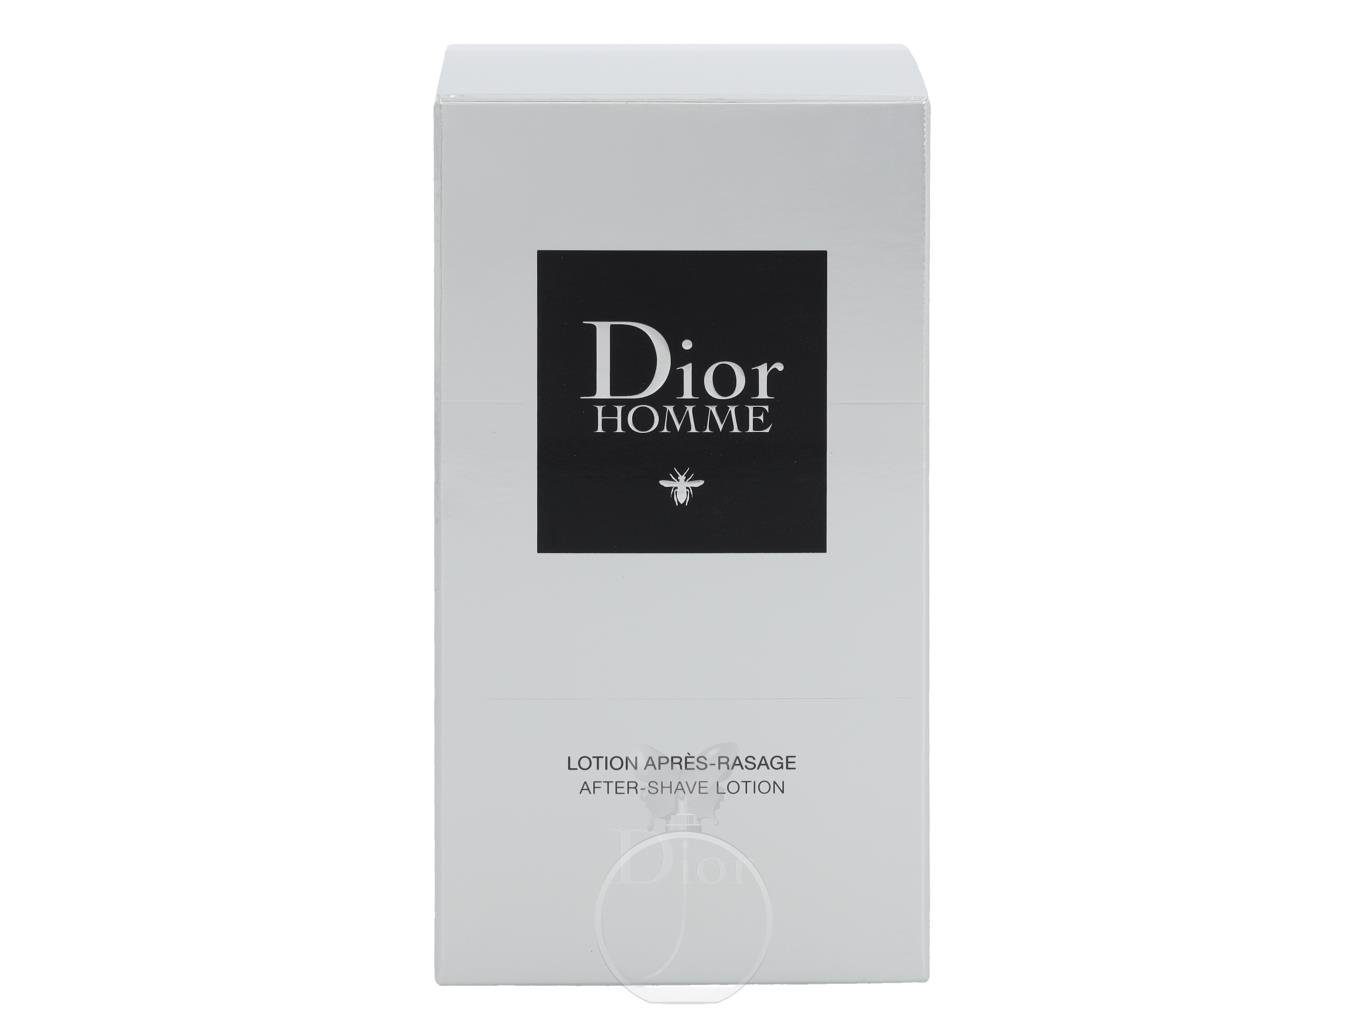 Dior Homme ml Shave Dior Lotion 100 Lotion After Shave After